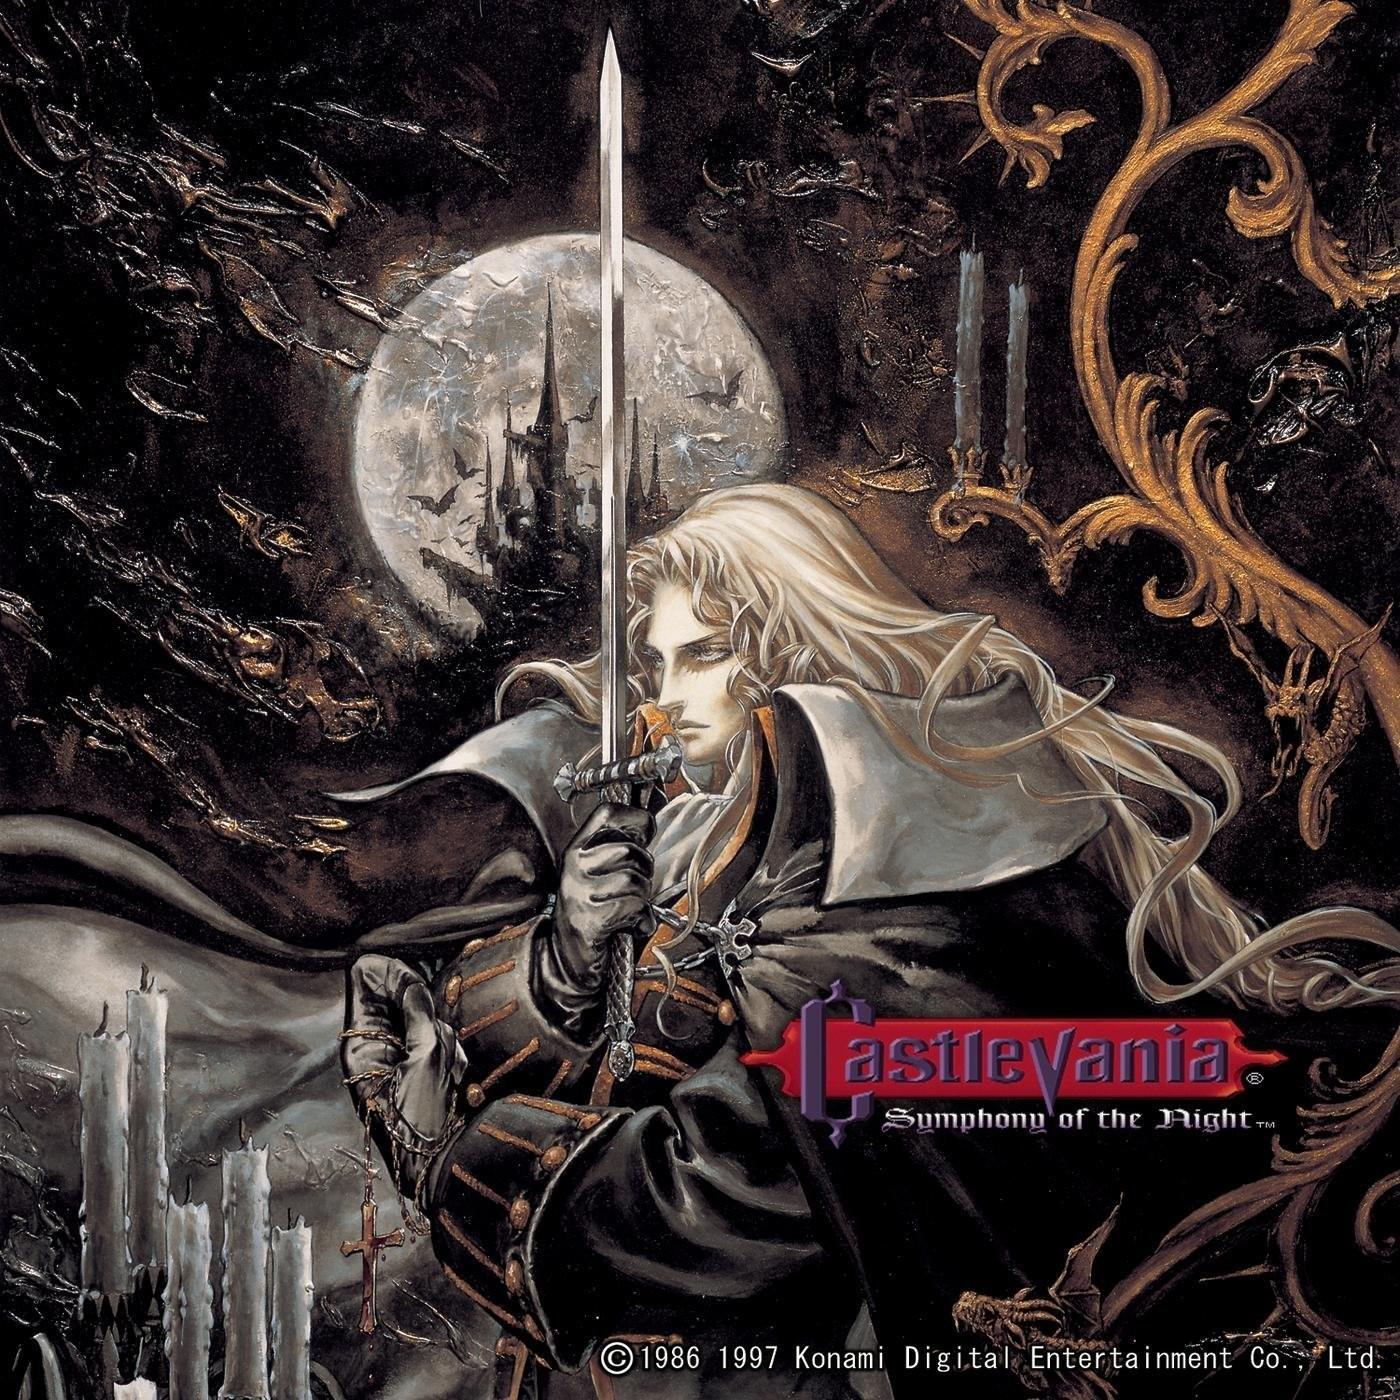 Castlevania Symphony of the Night Android for $0.99